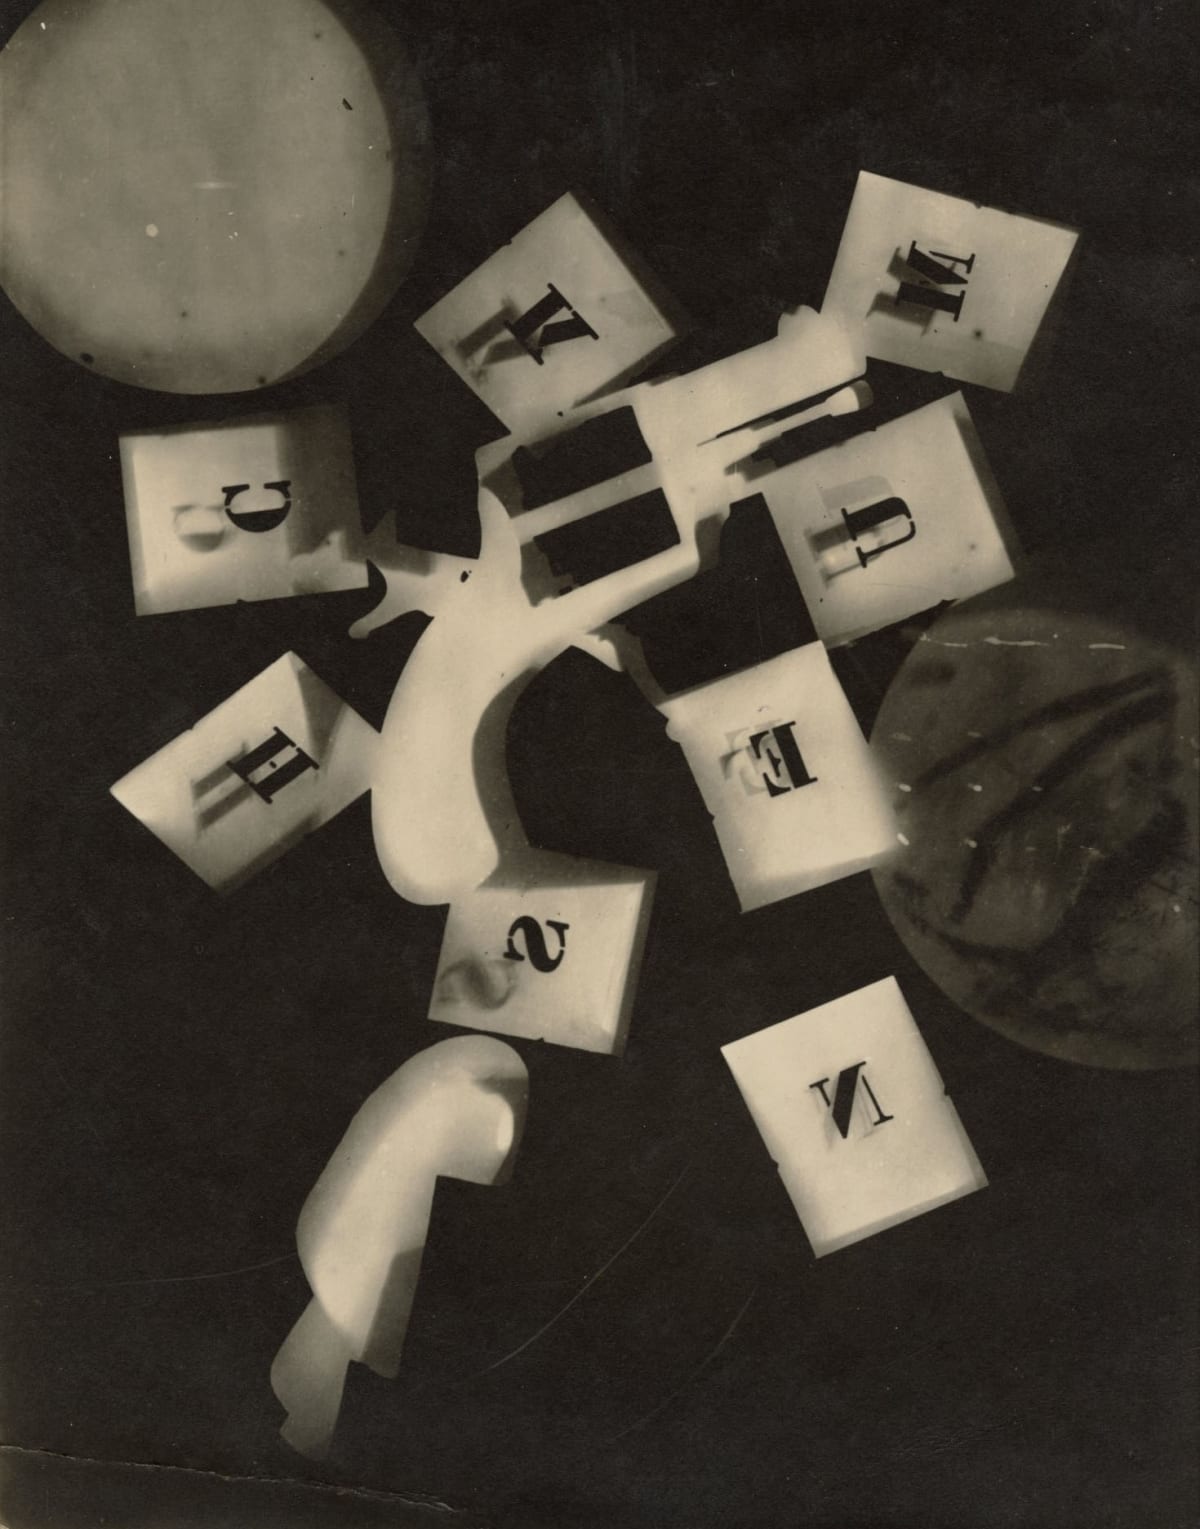 photogram of gun and stenciled letters with other unidentified geometric objects against black background by Man Ray